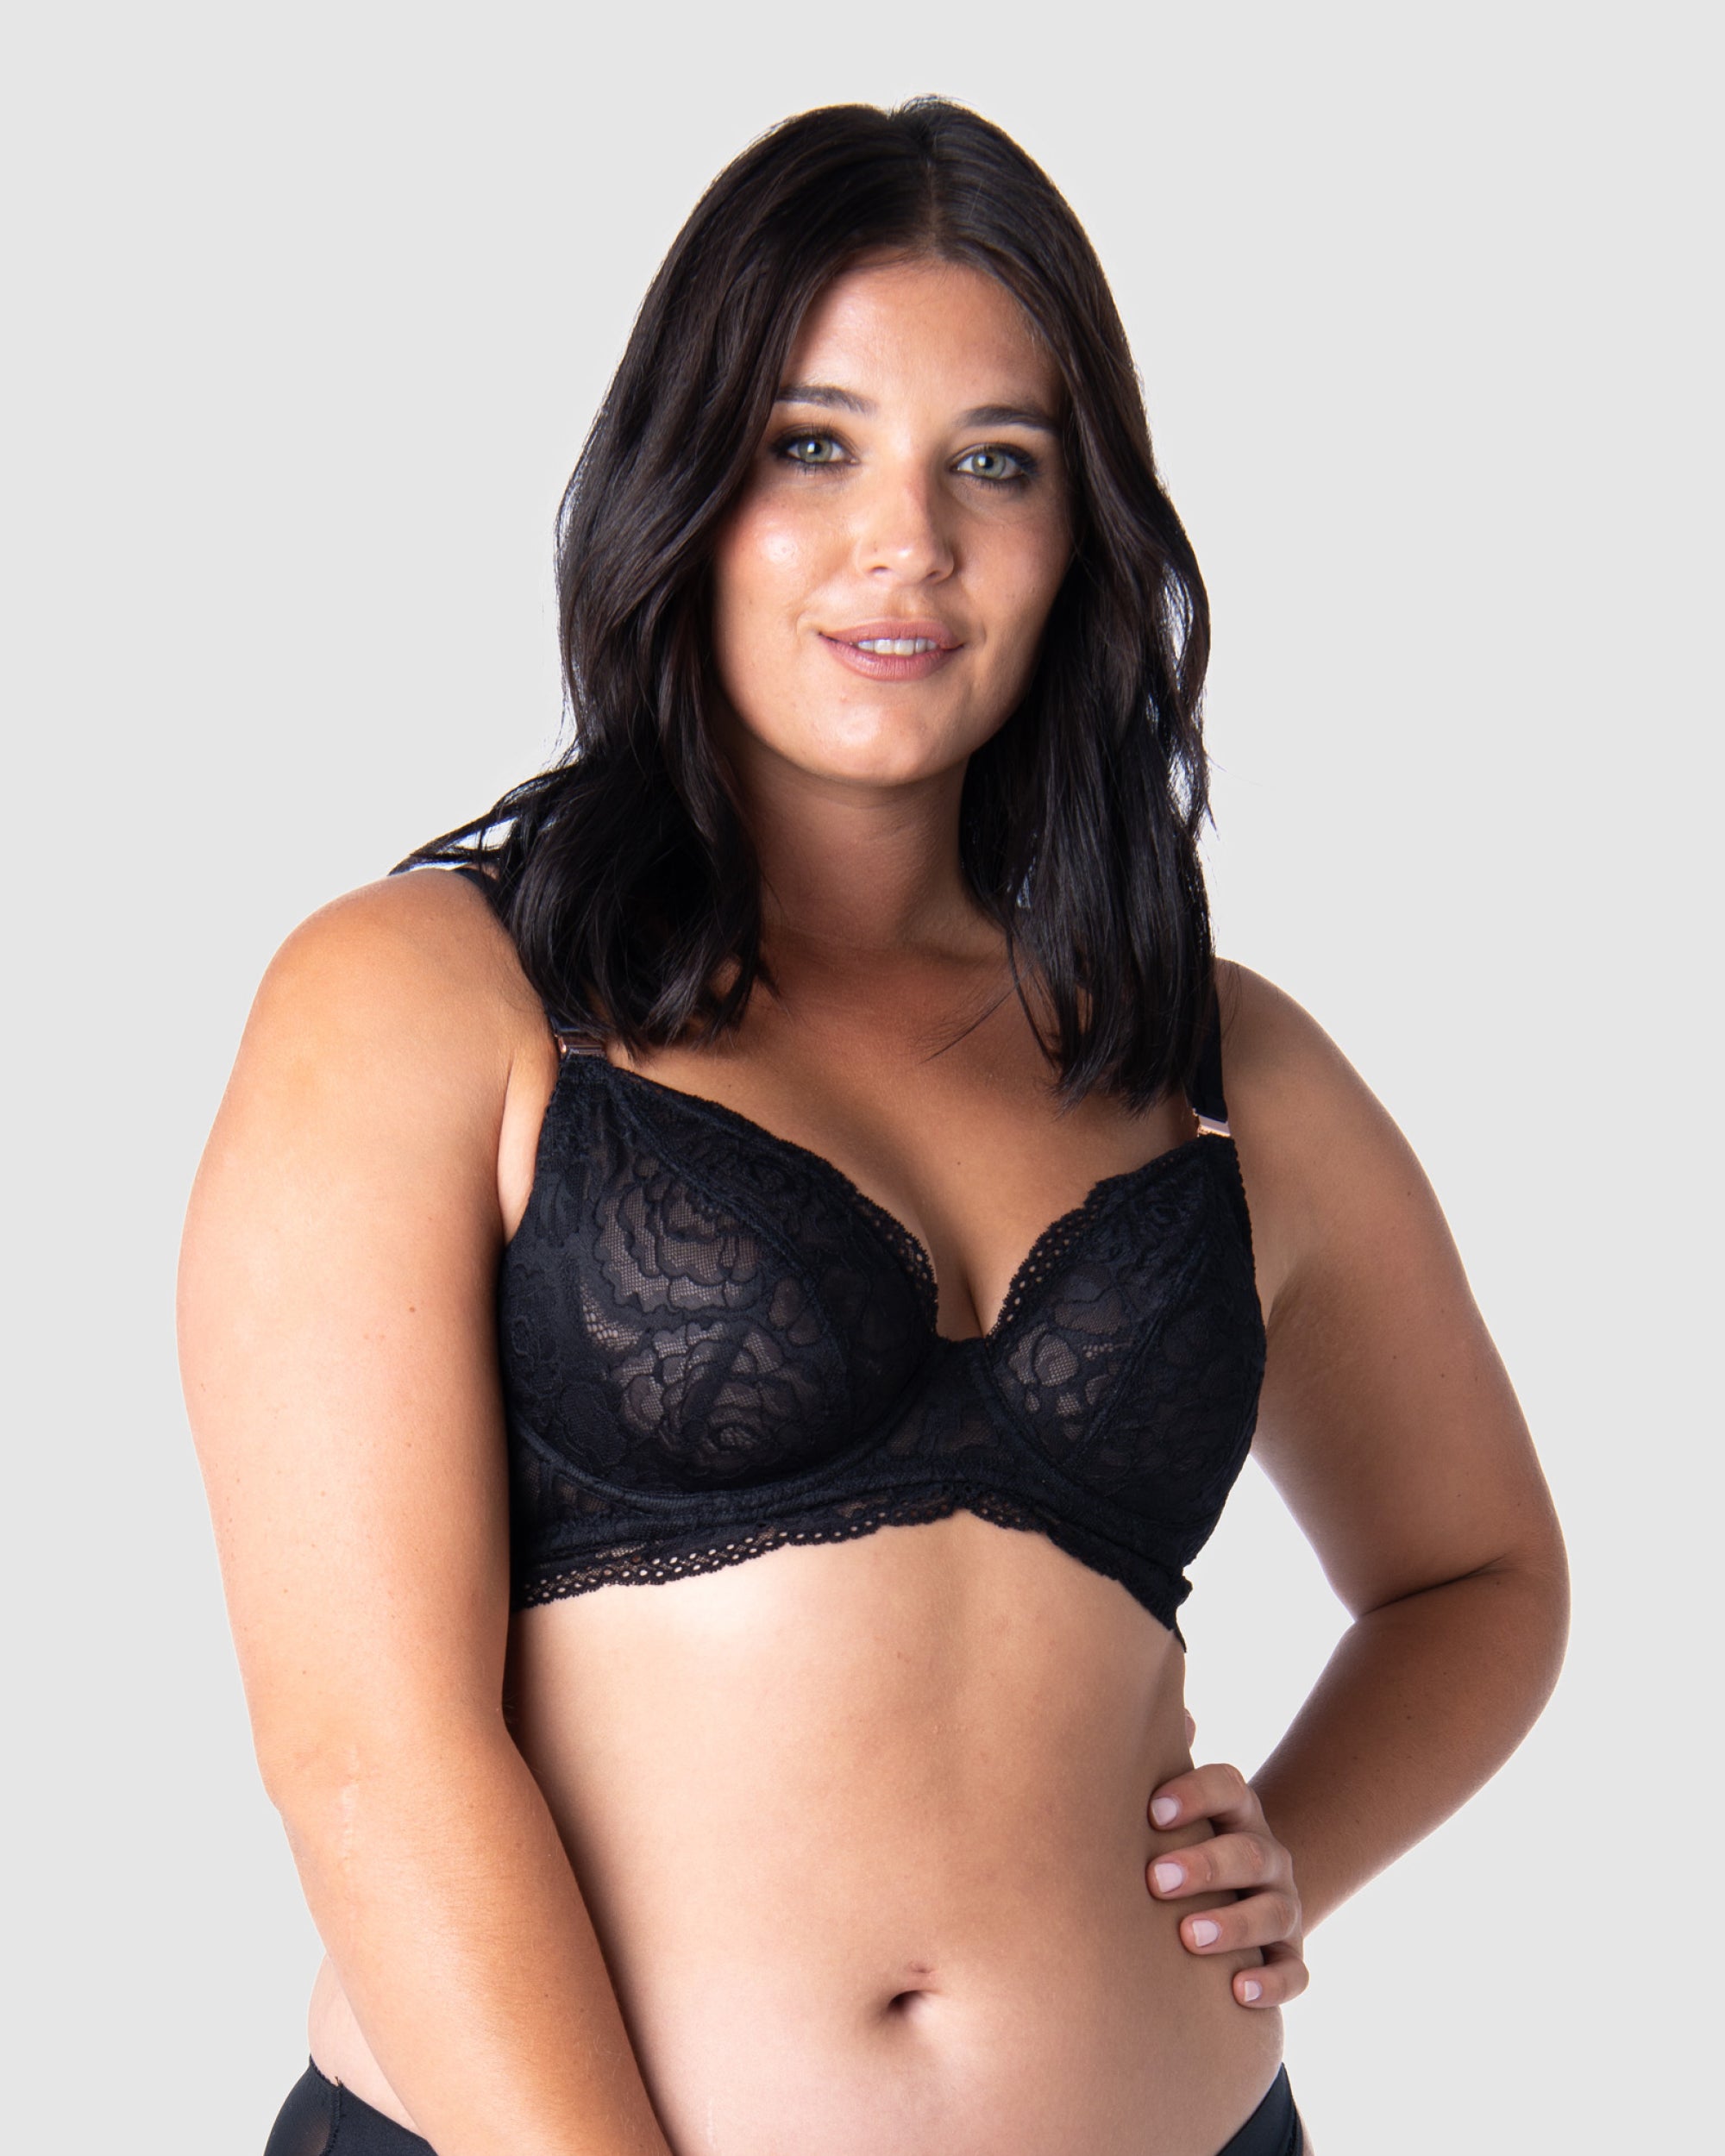 Ripe Maternity Seamless Briefs - Black - Momease Baby Boutique